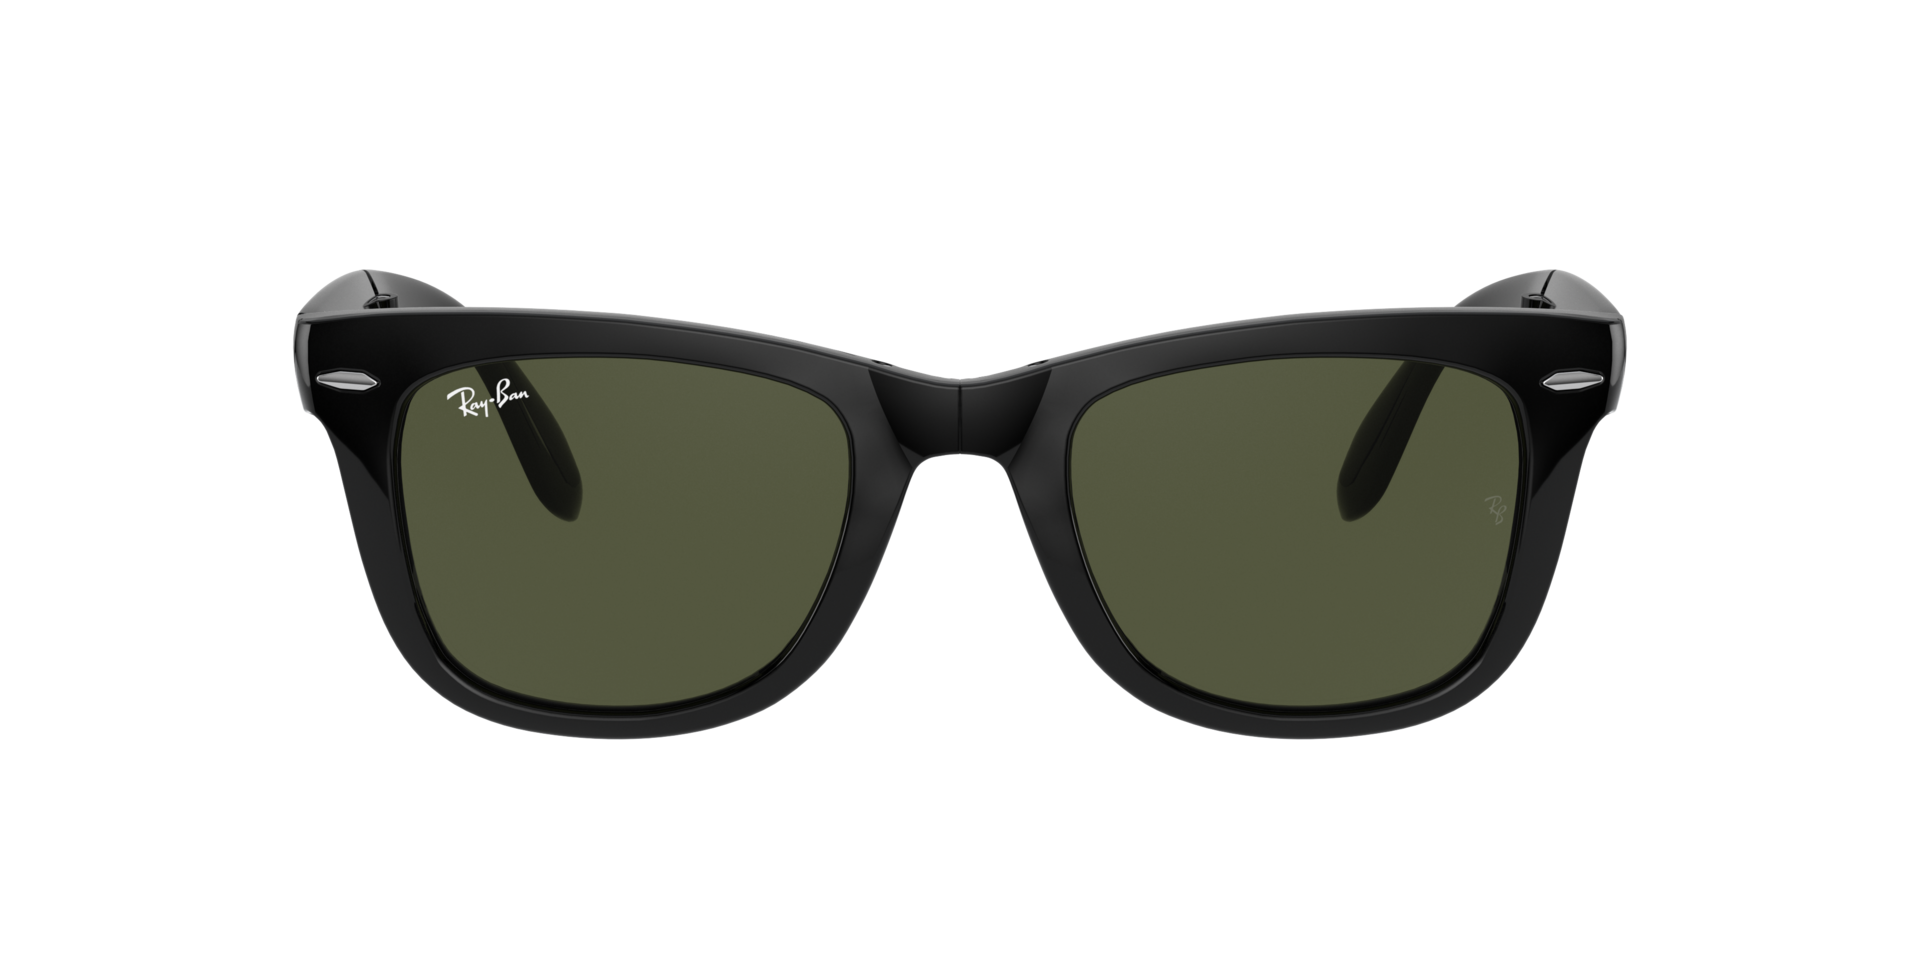 Buy Ray-Ban Clubmaster Folding Sunglasses Online.